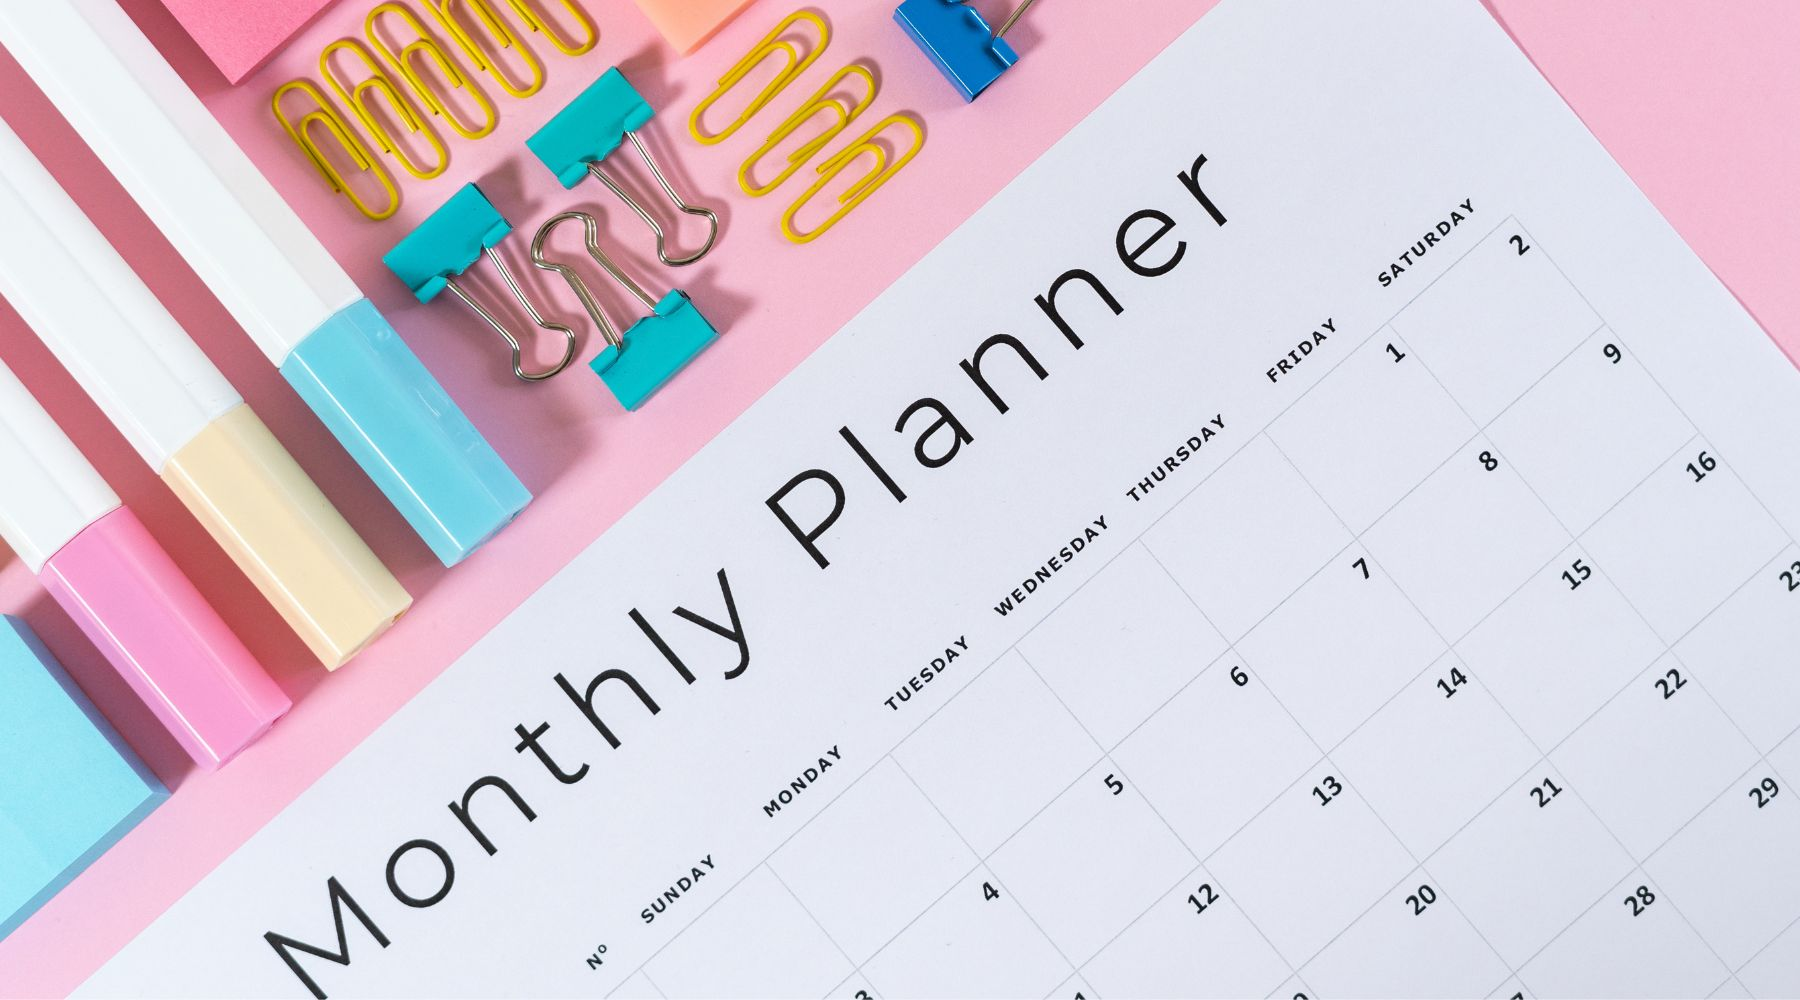 Monthly planner showing the first month with colorful paper clips and highlighters on a pink surface.